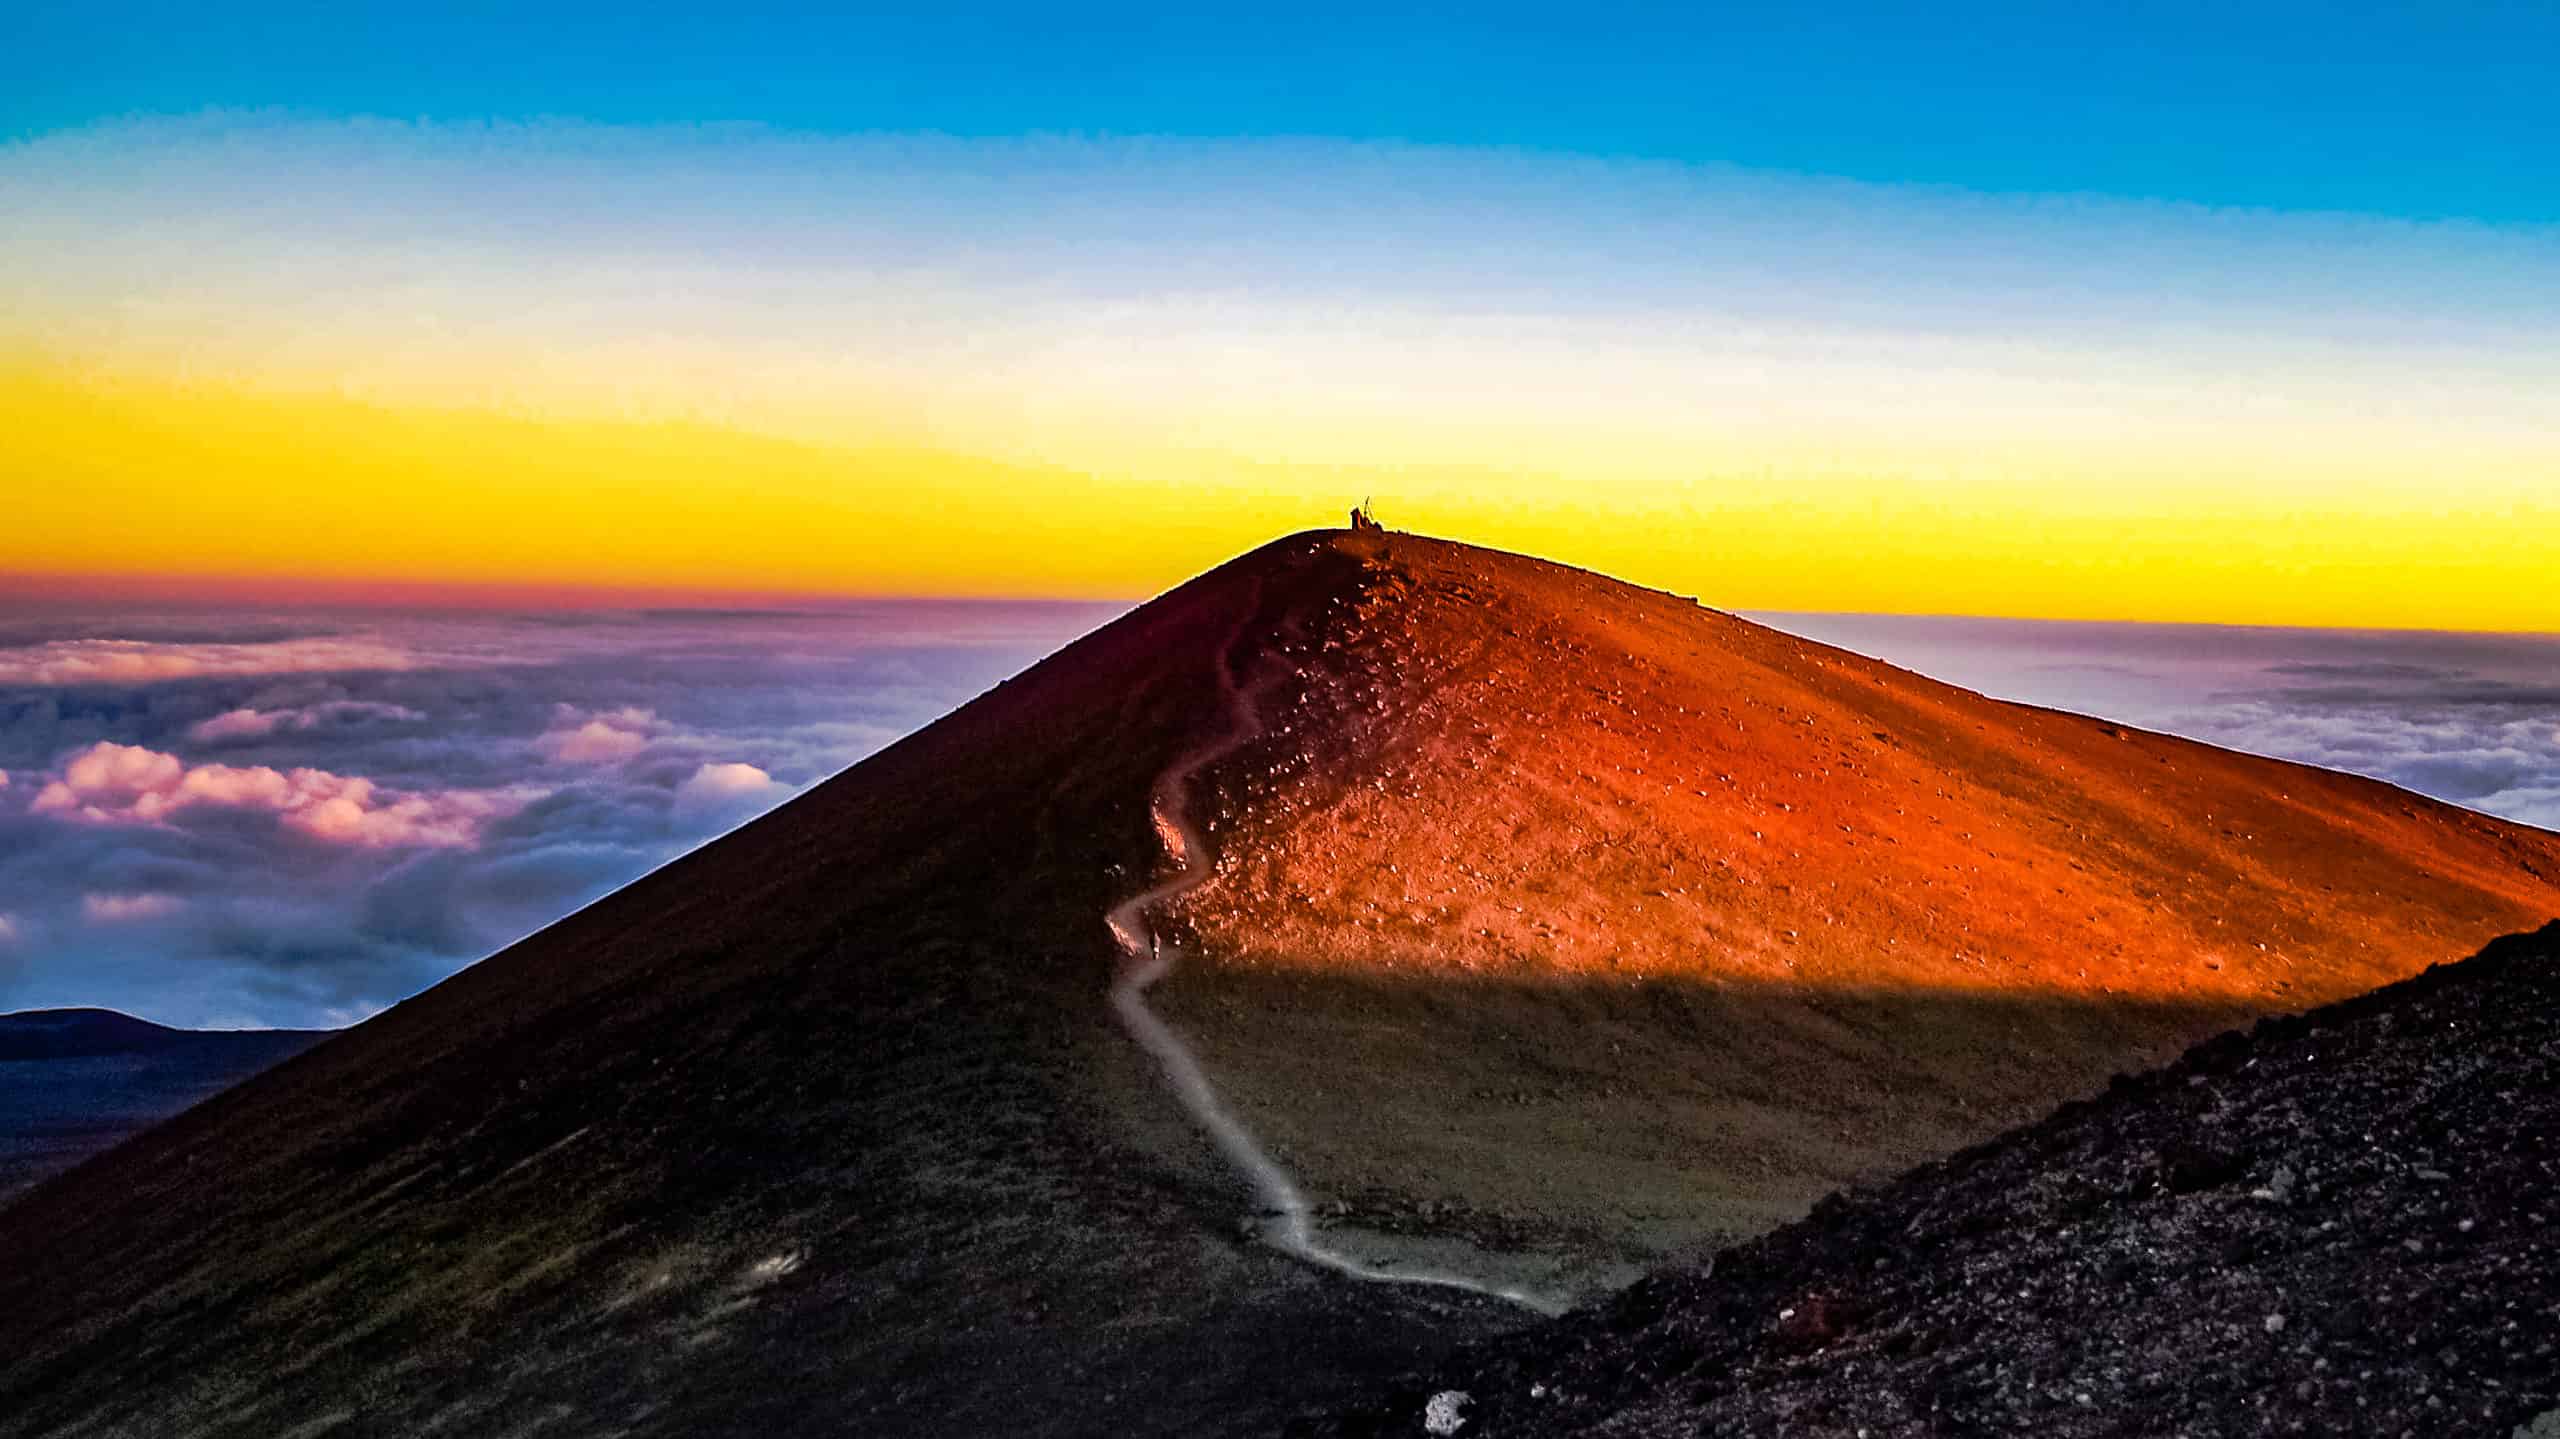 The Summit of Mauna Kea in Hawaii - The Coldest Place in Hawaii